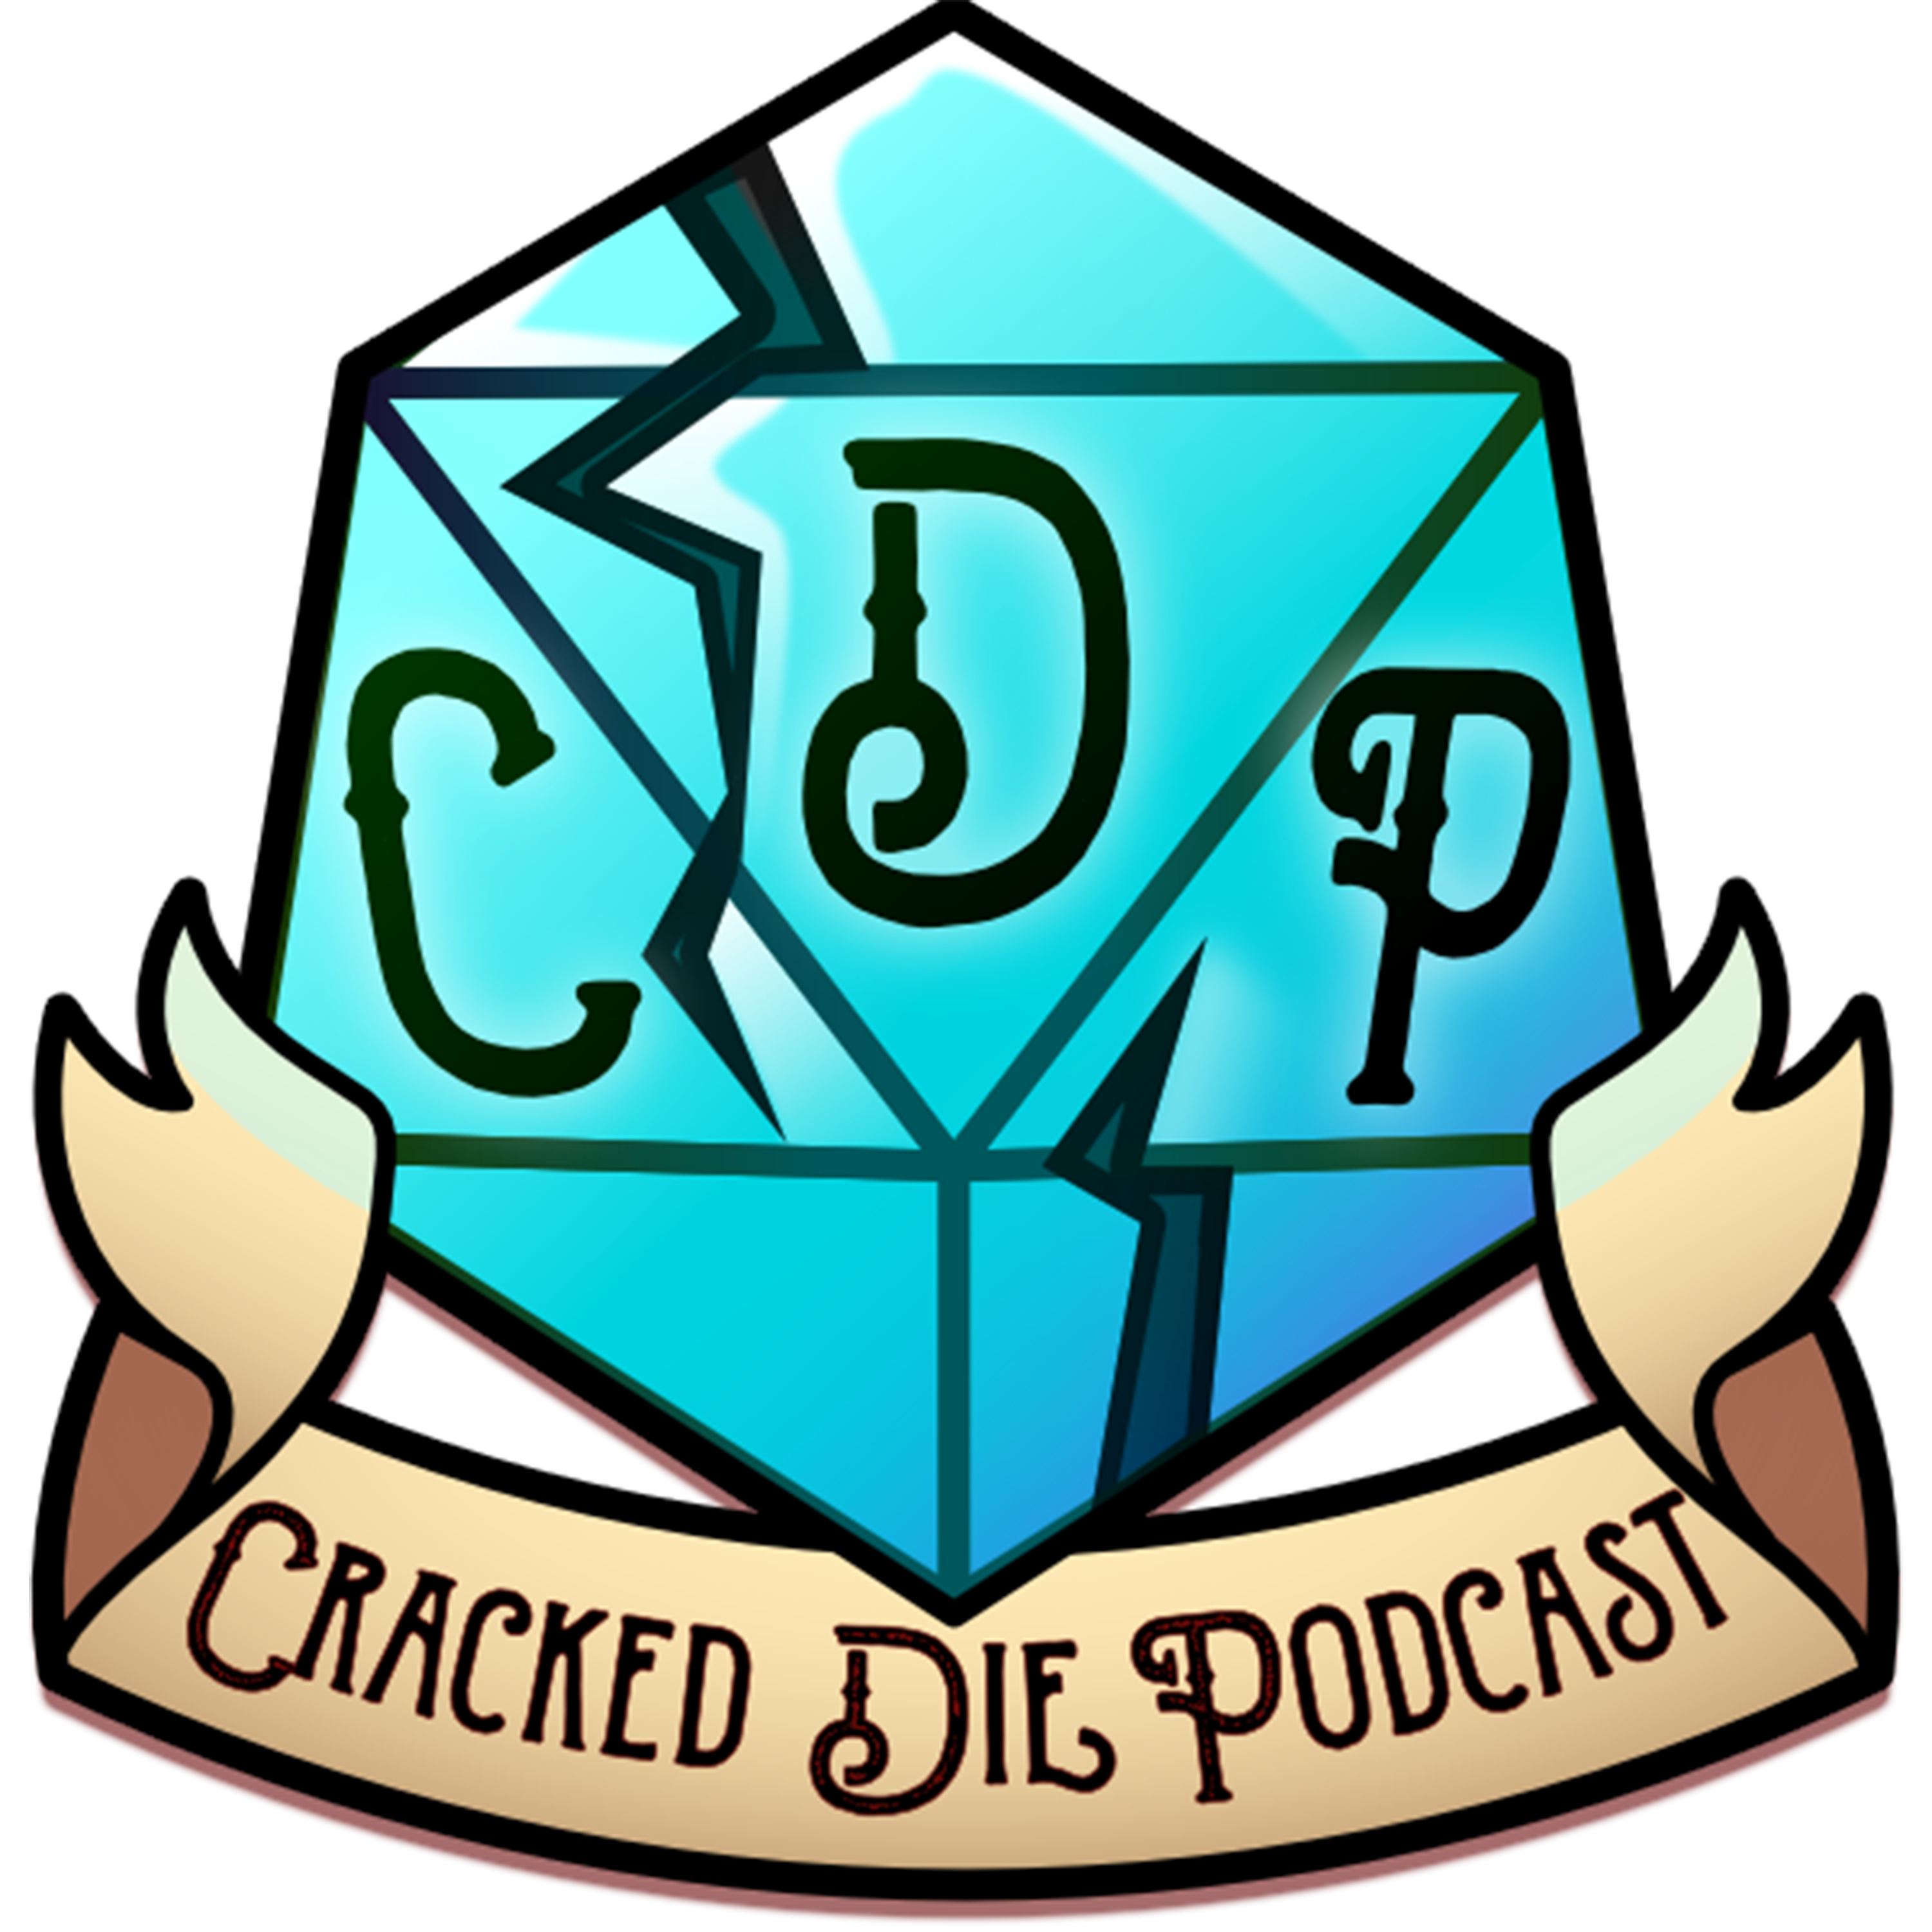 The Cracked Die Podcast - Episode 44 - Started from the Bottom